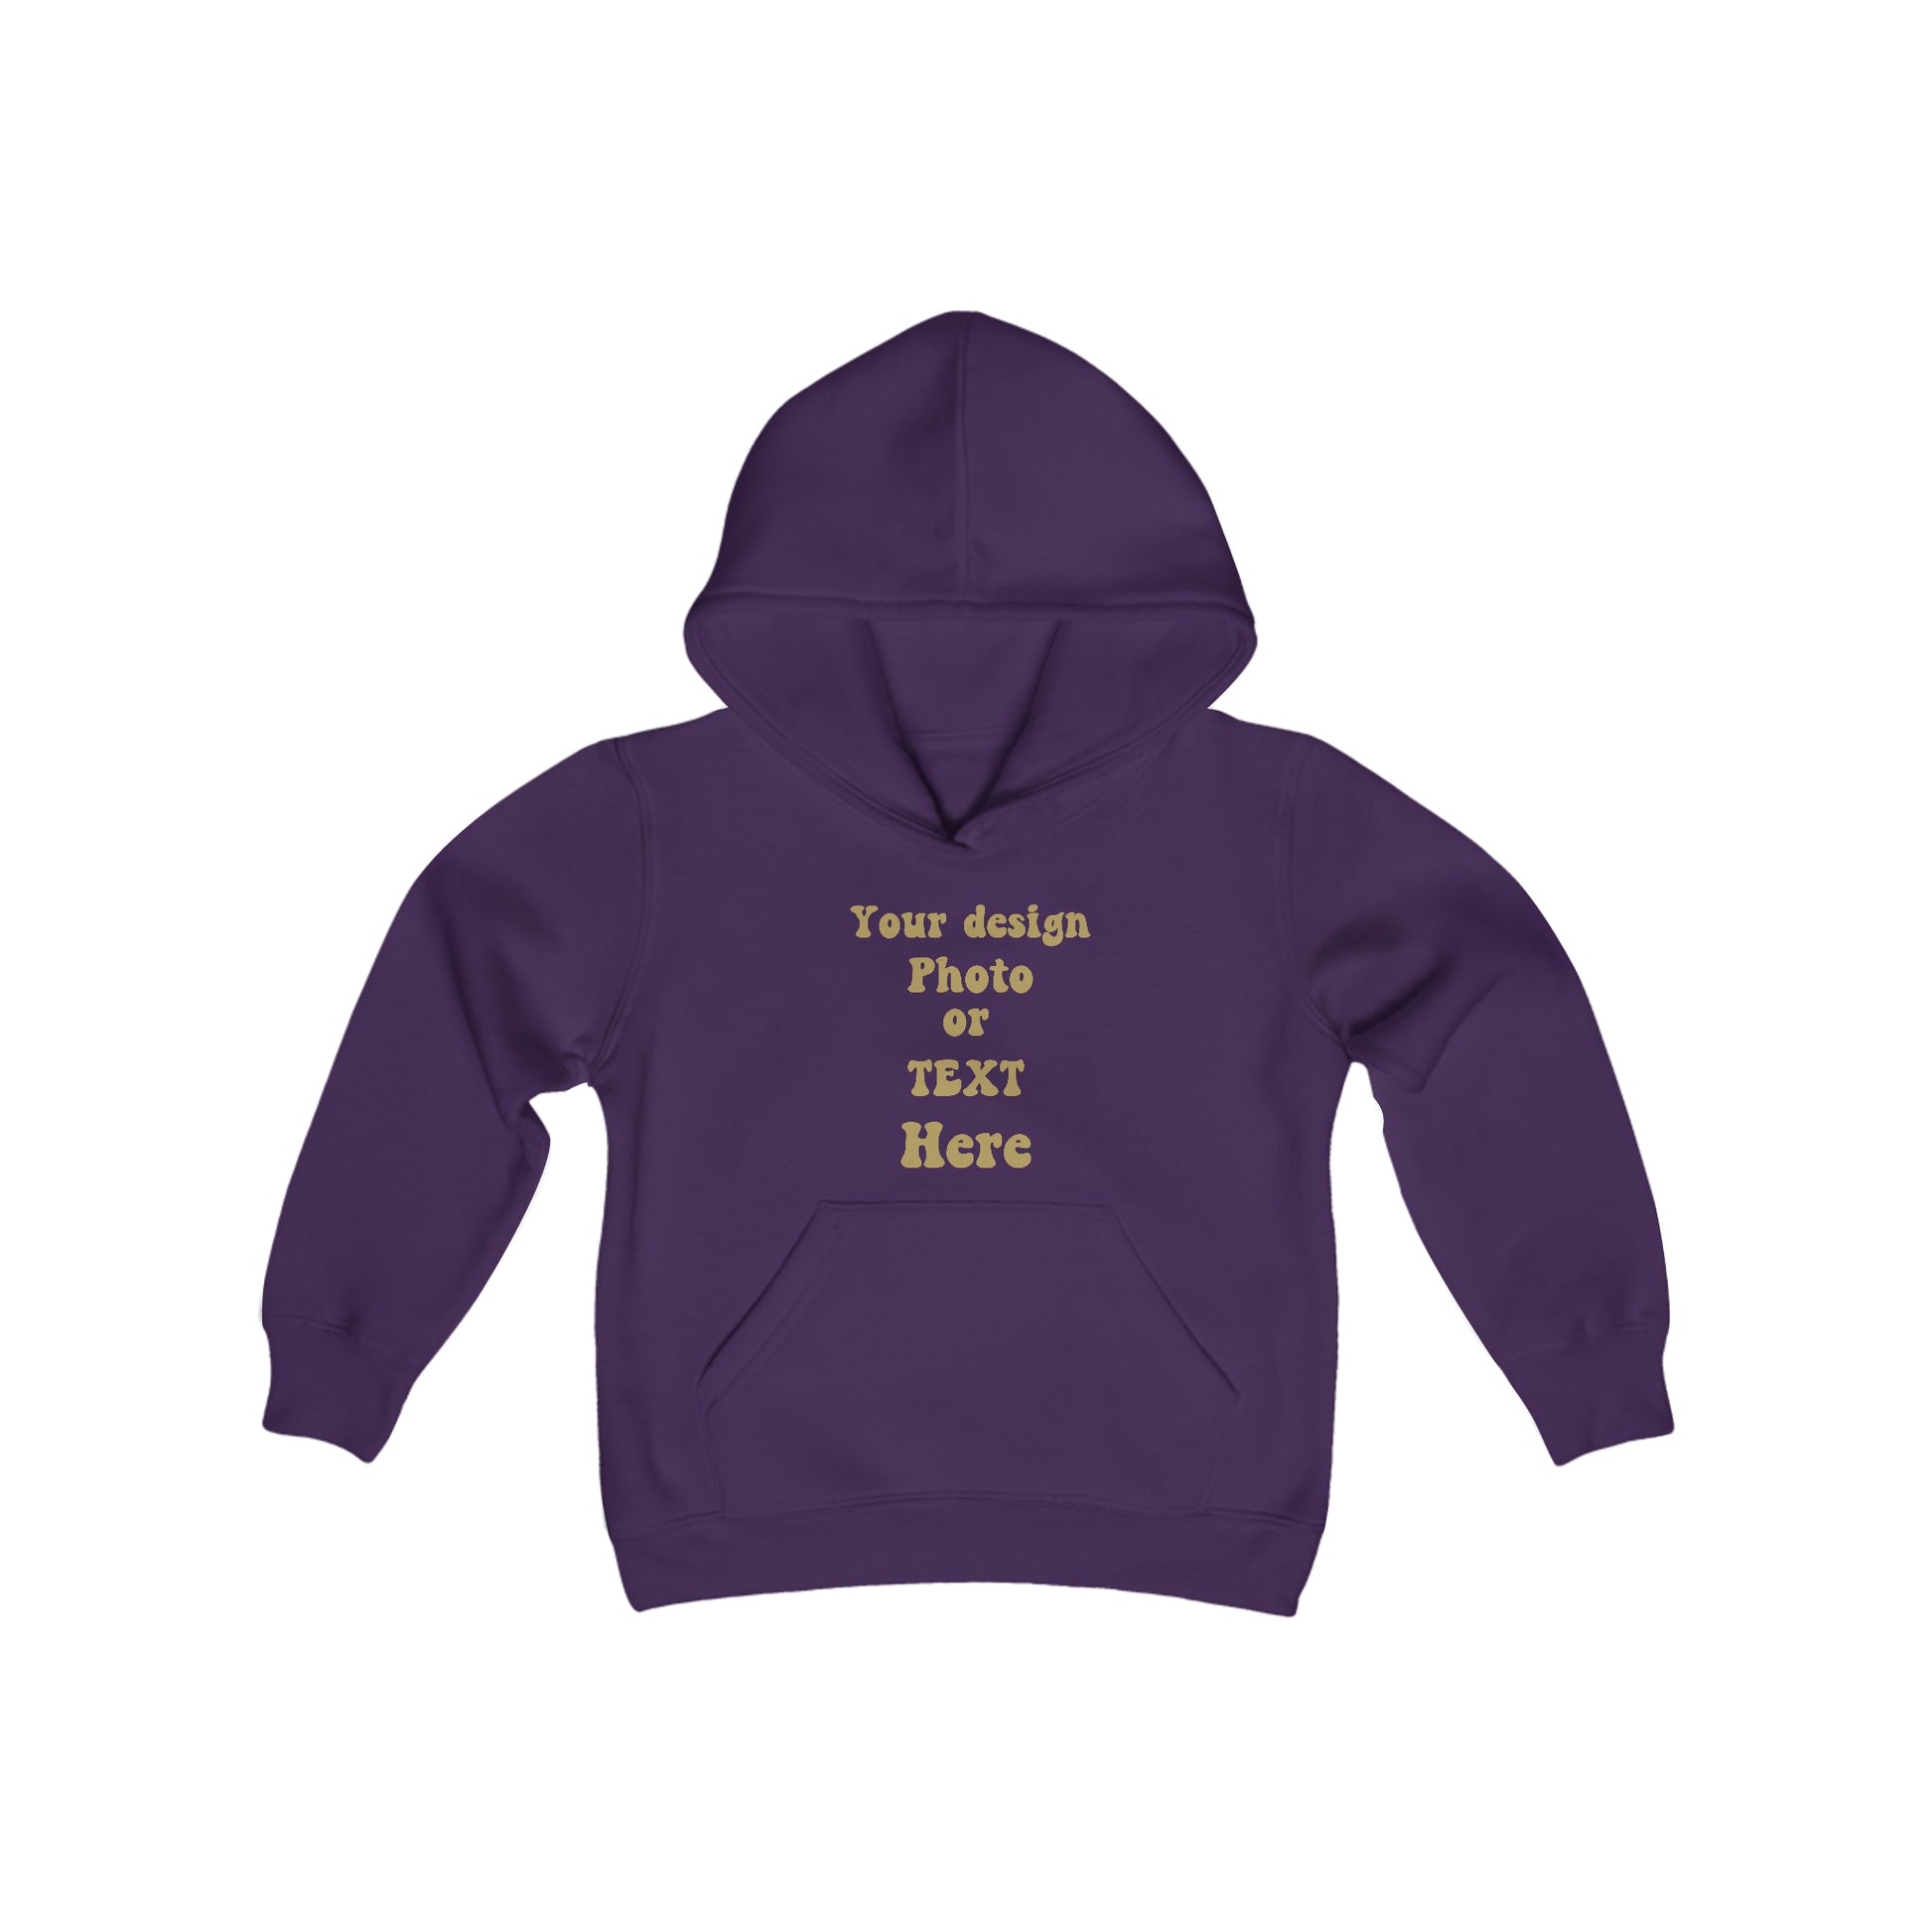 Youth Heavy Blend Hooded Sweatshirt - Personalize It with Text and Photo Kids clothes Purple S 